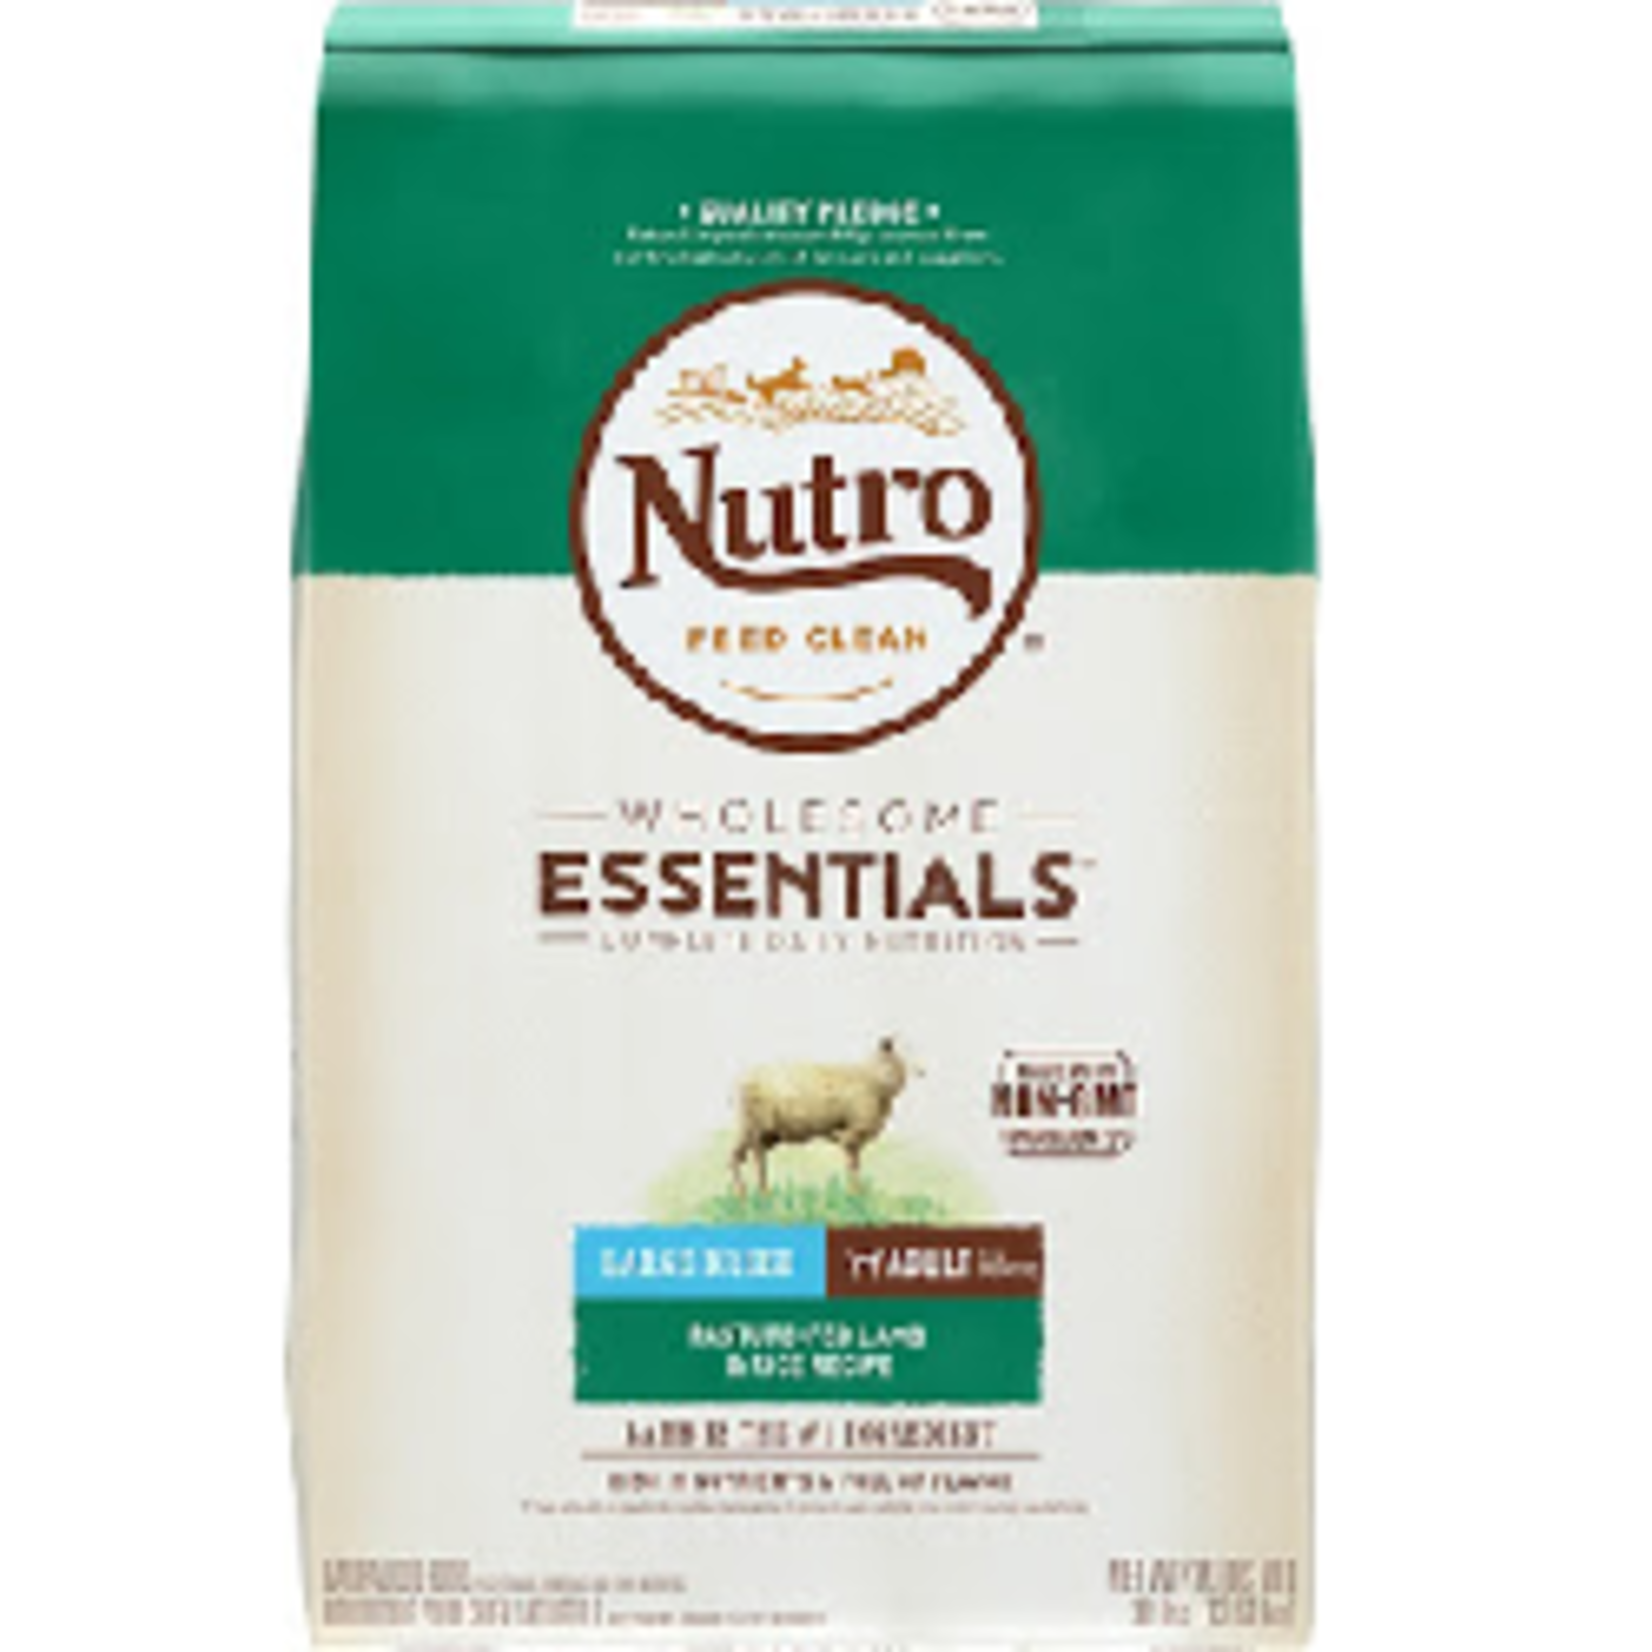 Nutro Nutro Wholesome Essentials Large Breed 30lb Dog Food